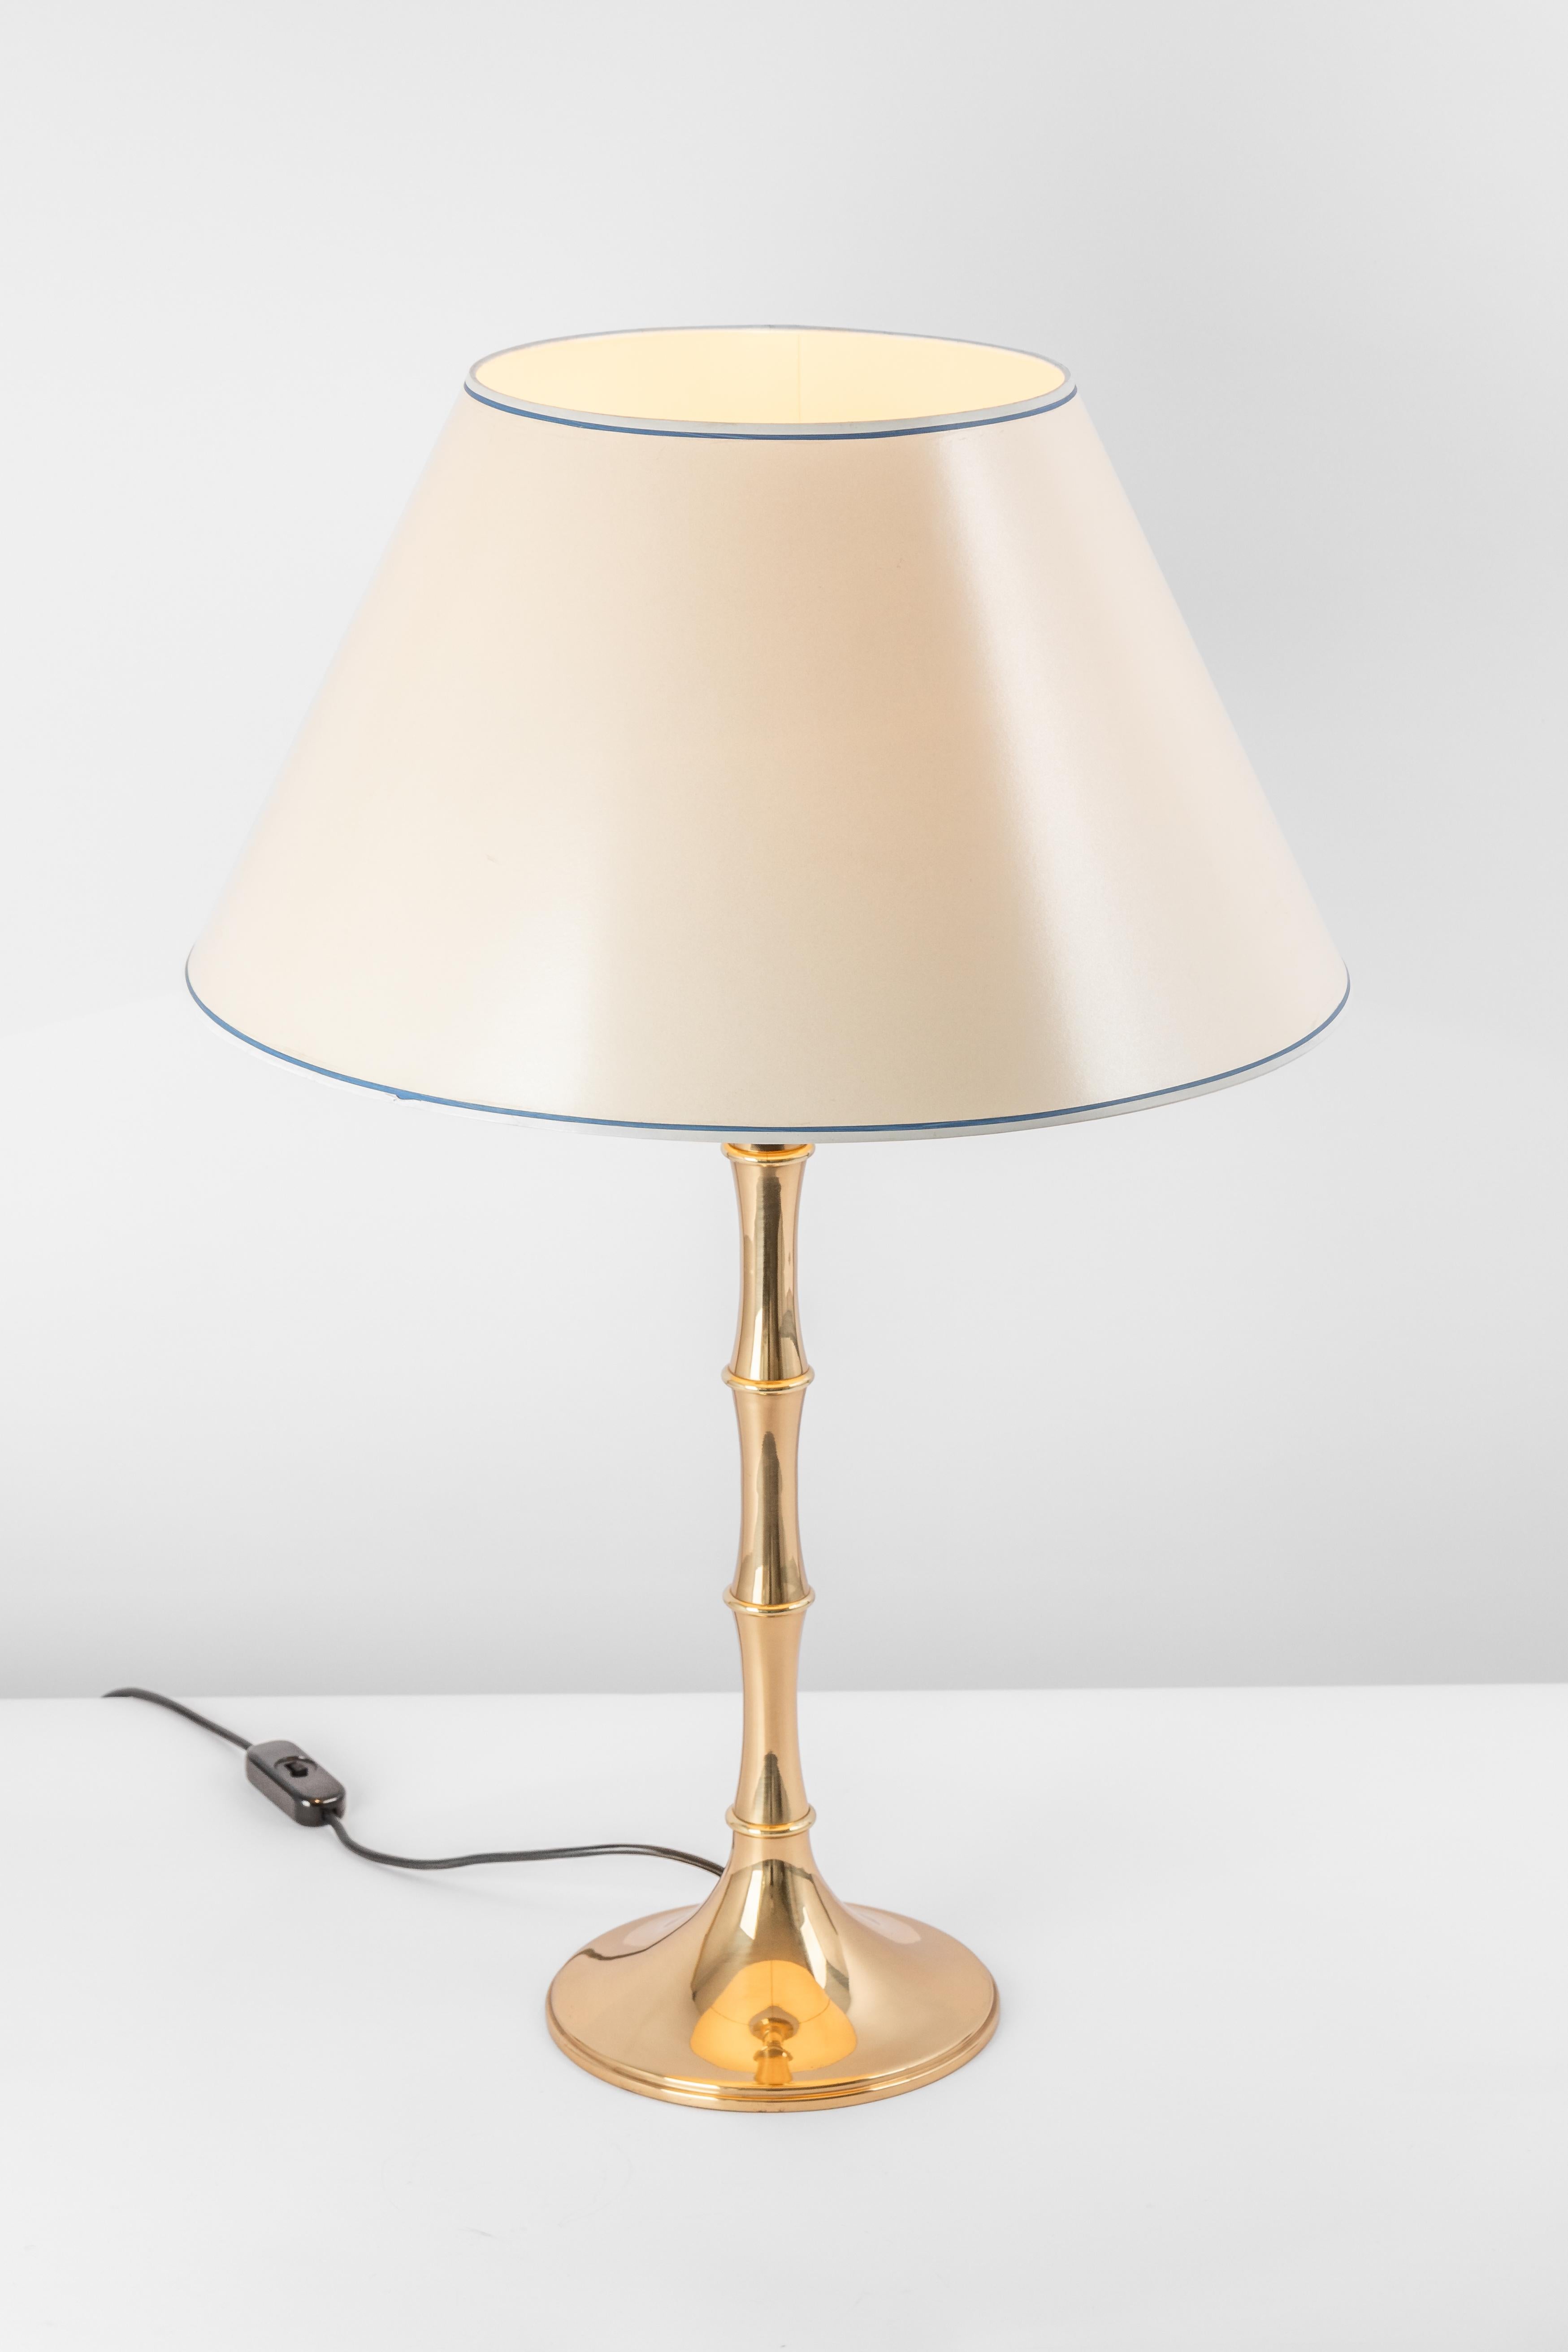 Elegant brass bamboo table lamps Model 'ML 1'. Designed by Ingo Maurer, 1968 for Design M 1968 for Design M, Munich, Germany.
Great shape with a white shade.
Good condition with small signs of age and use.

Each table light takes one Socket: 1 x